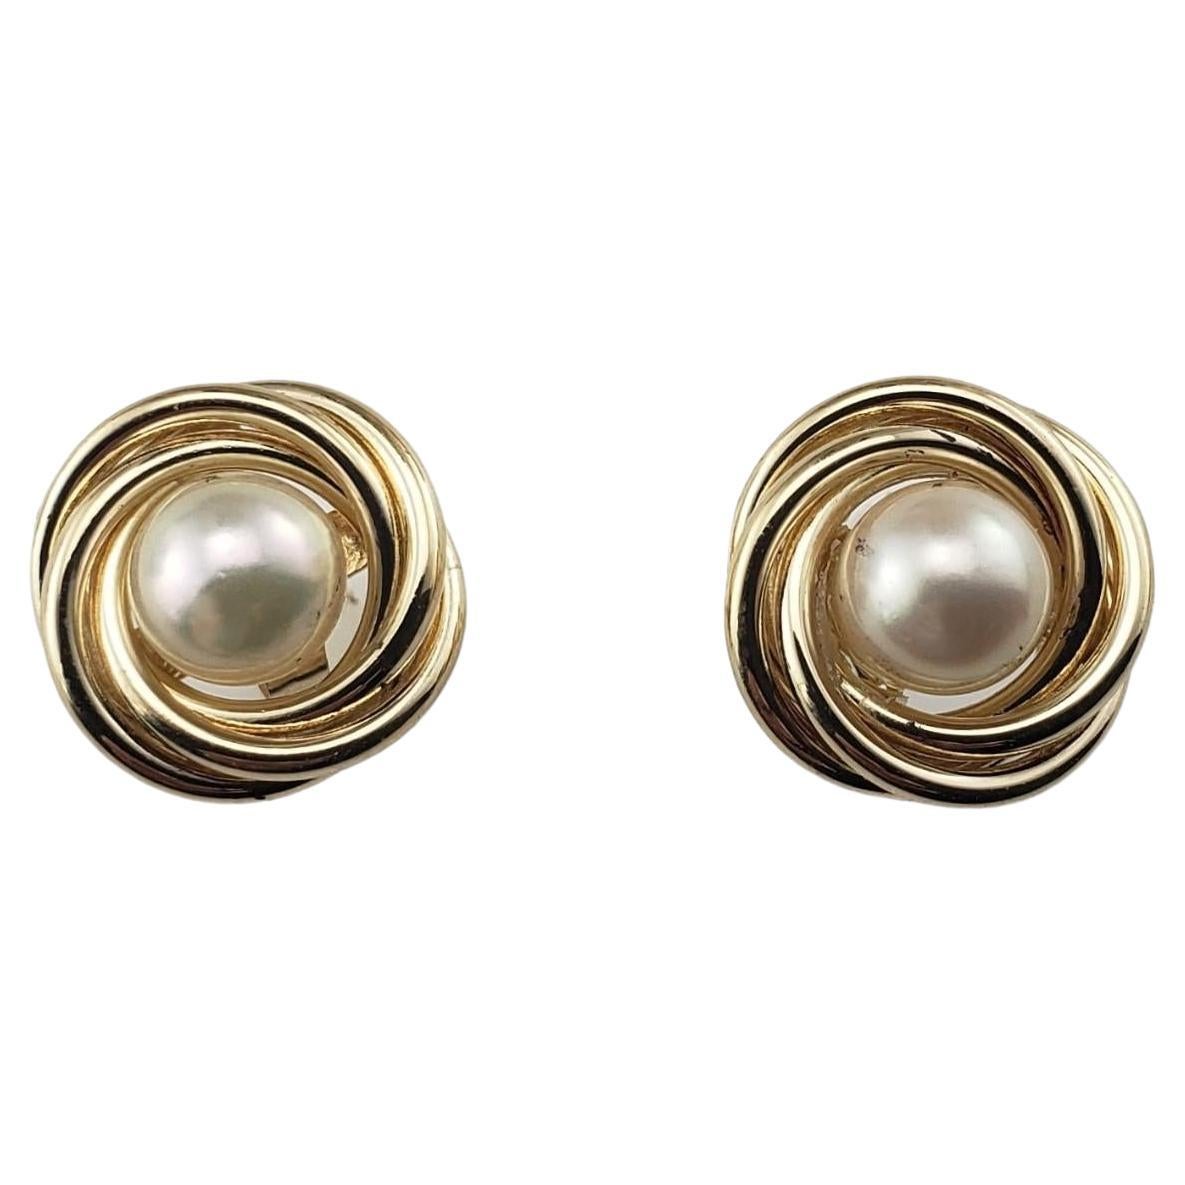  14 Karat Yellow Gold and Pearl Earrings #15516 For Sale